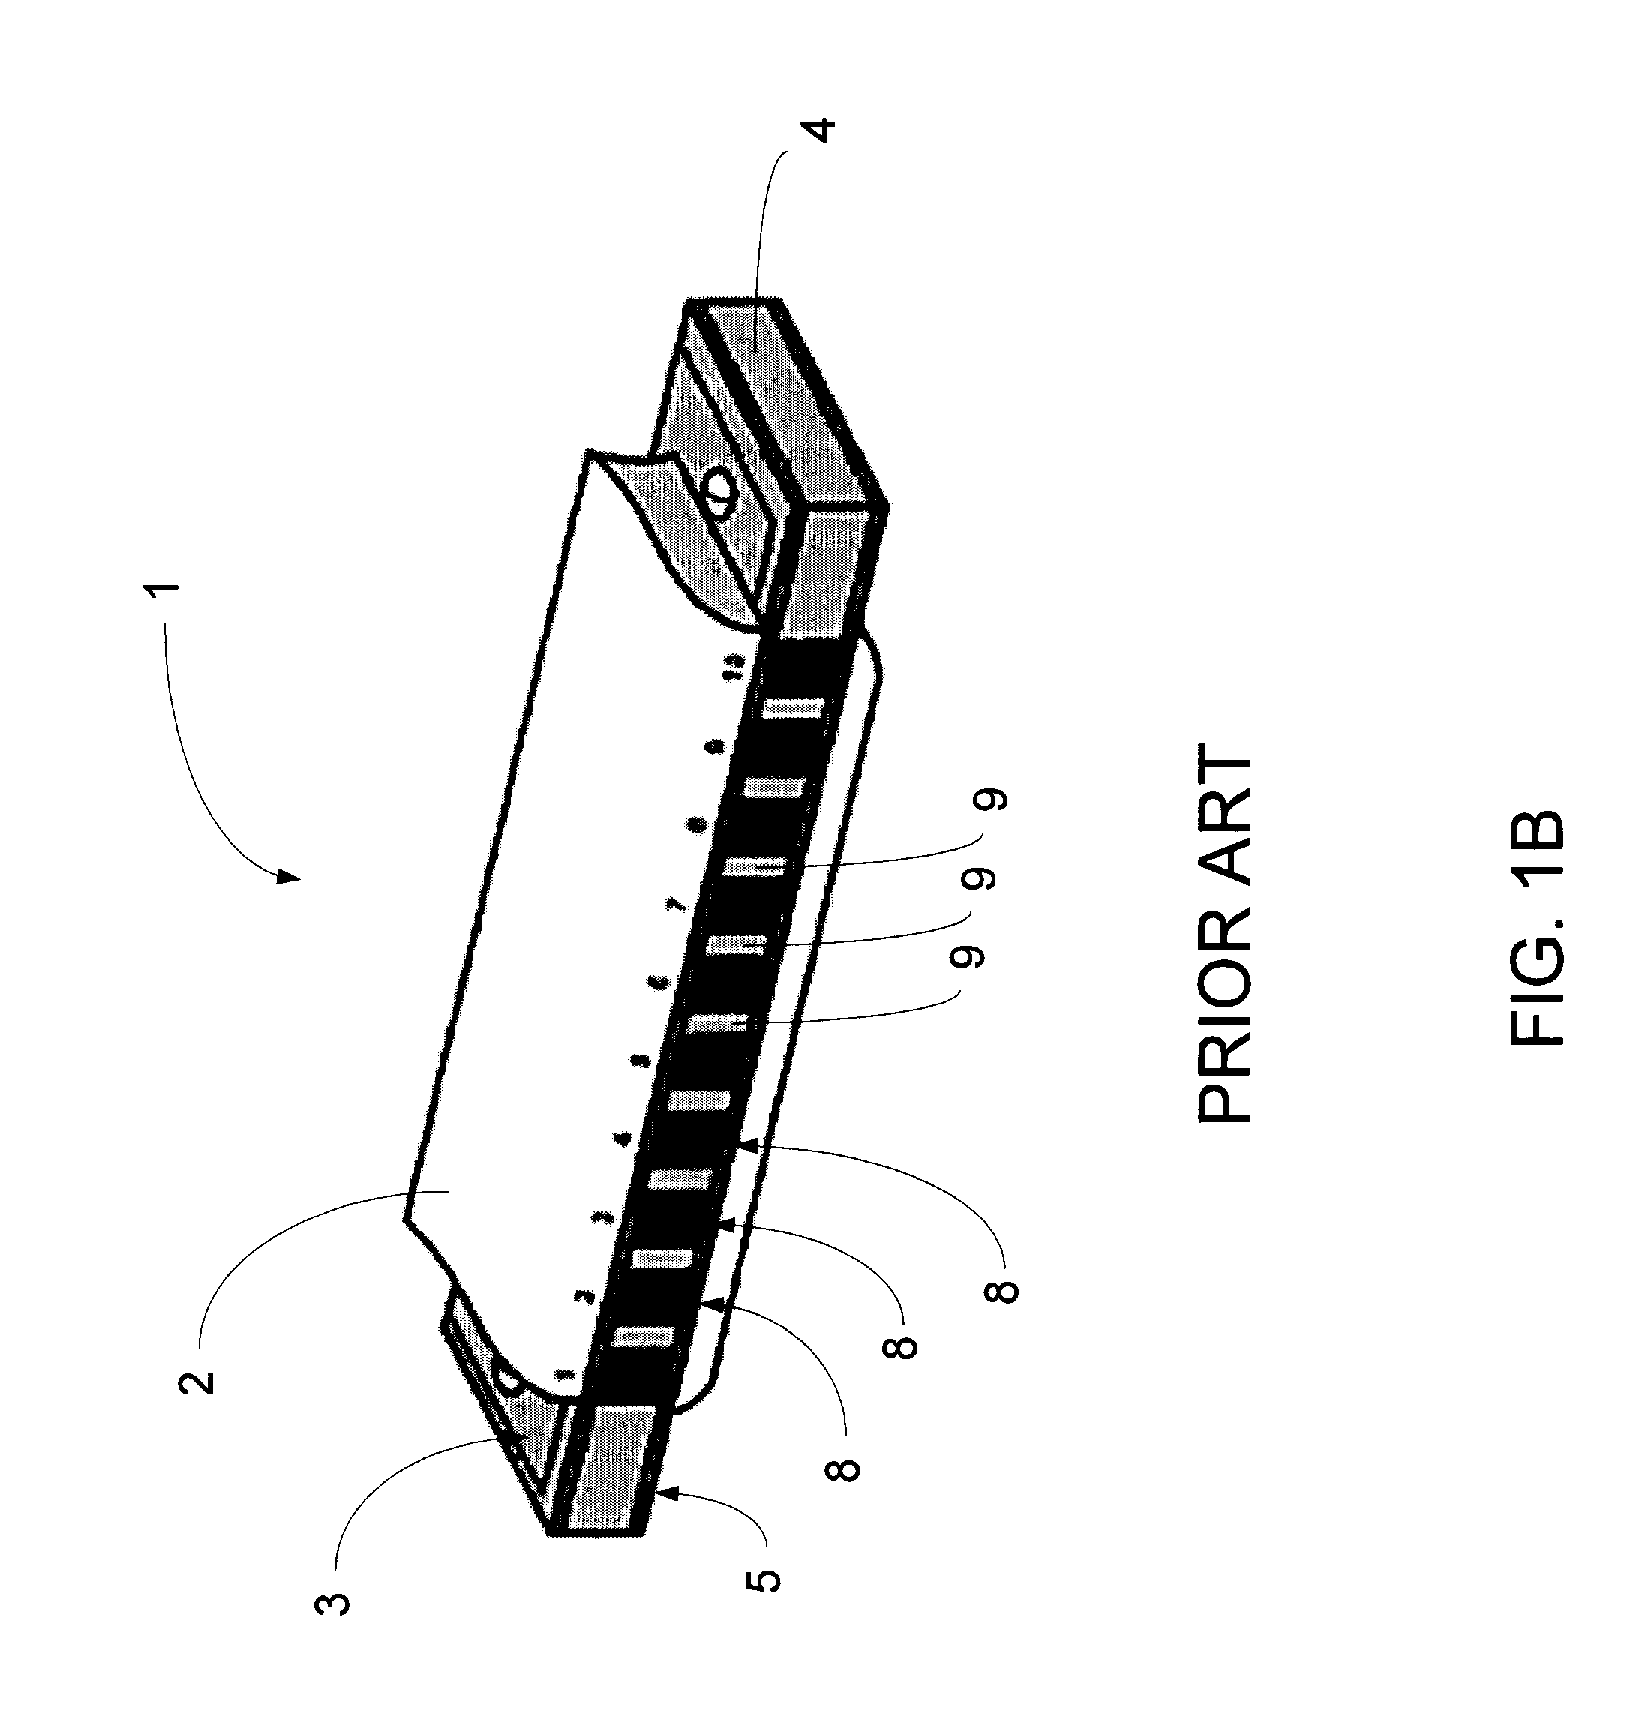 Harmonica adapted for chordal jamming and method and use of same for improving pulmonary function